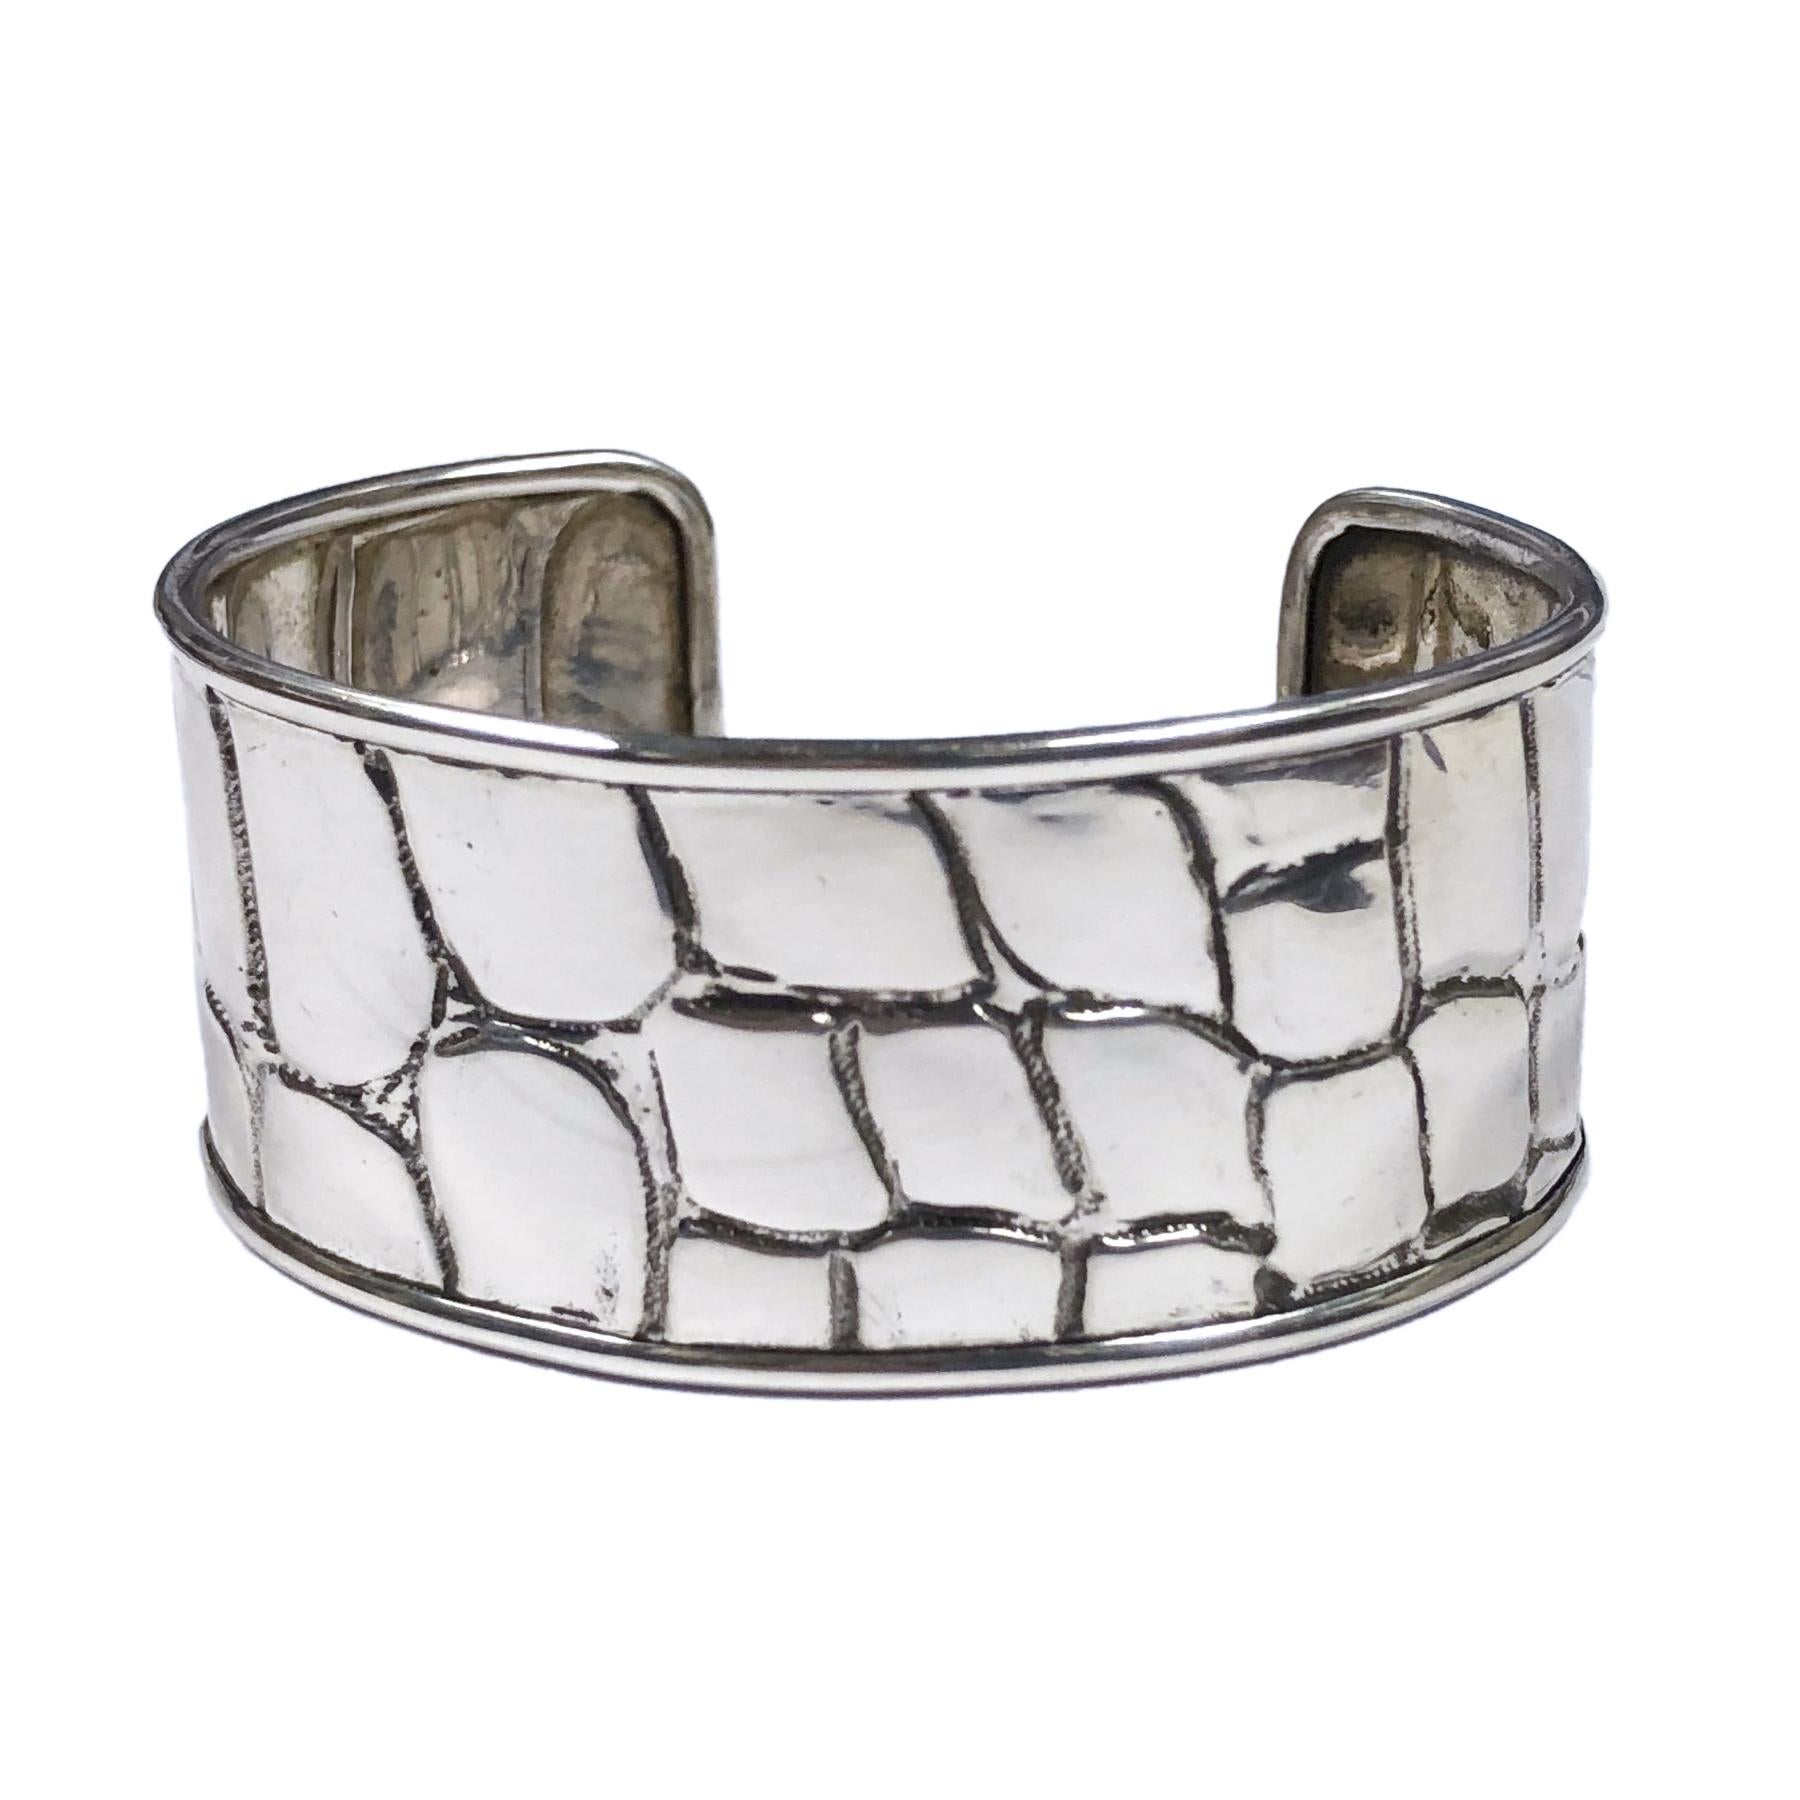 Circa 1990 Tiffany & Company Sterling Silver Cuff Bracelet with a textured Alligator pattern. measuring 1 inch wide an opening of 1 1/8 inch and a wrist measurement of 6 3/4 inches.